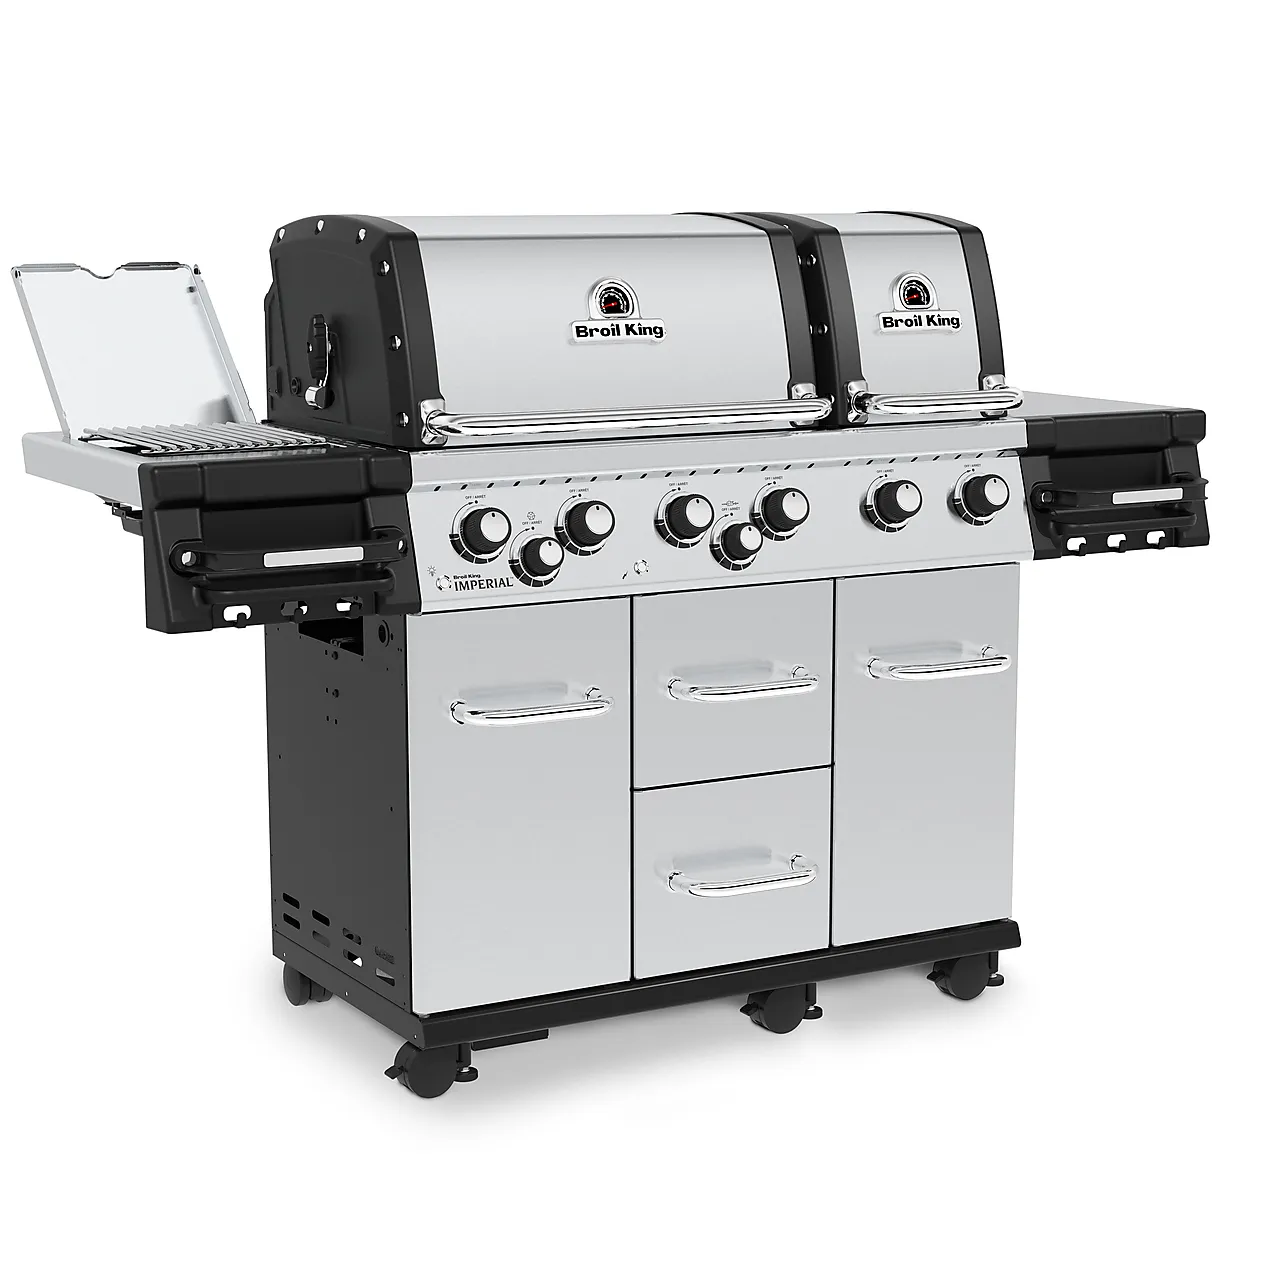 Gassgrill Imperial S 690 IR null - null - 4